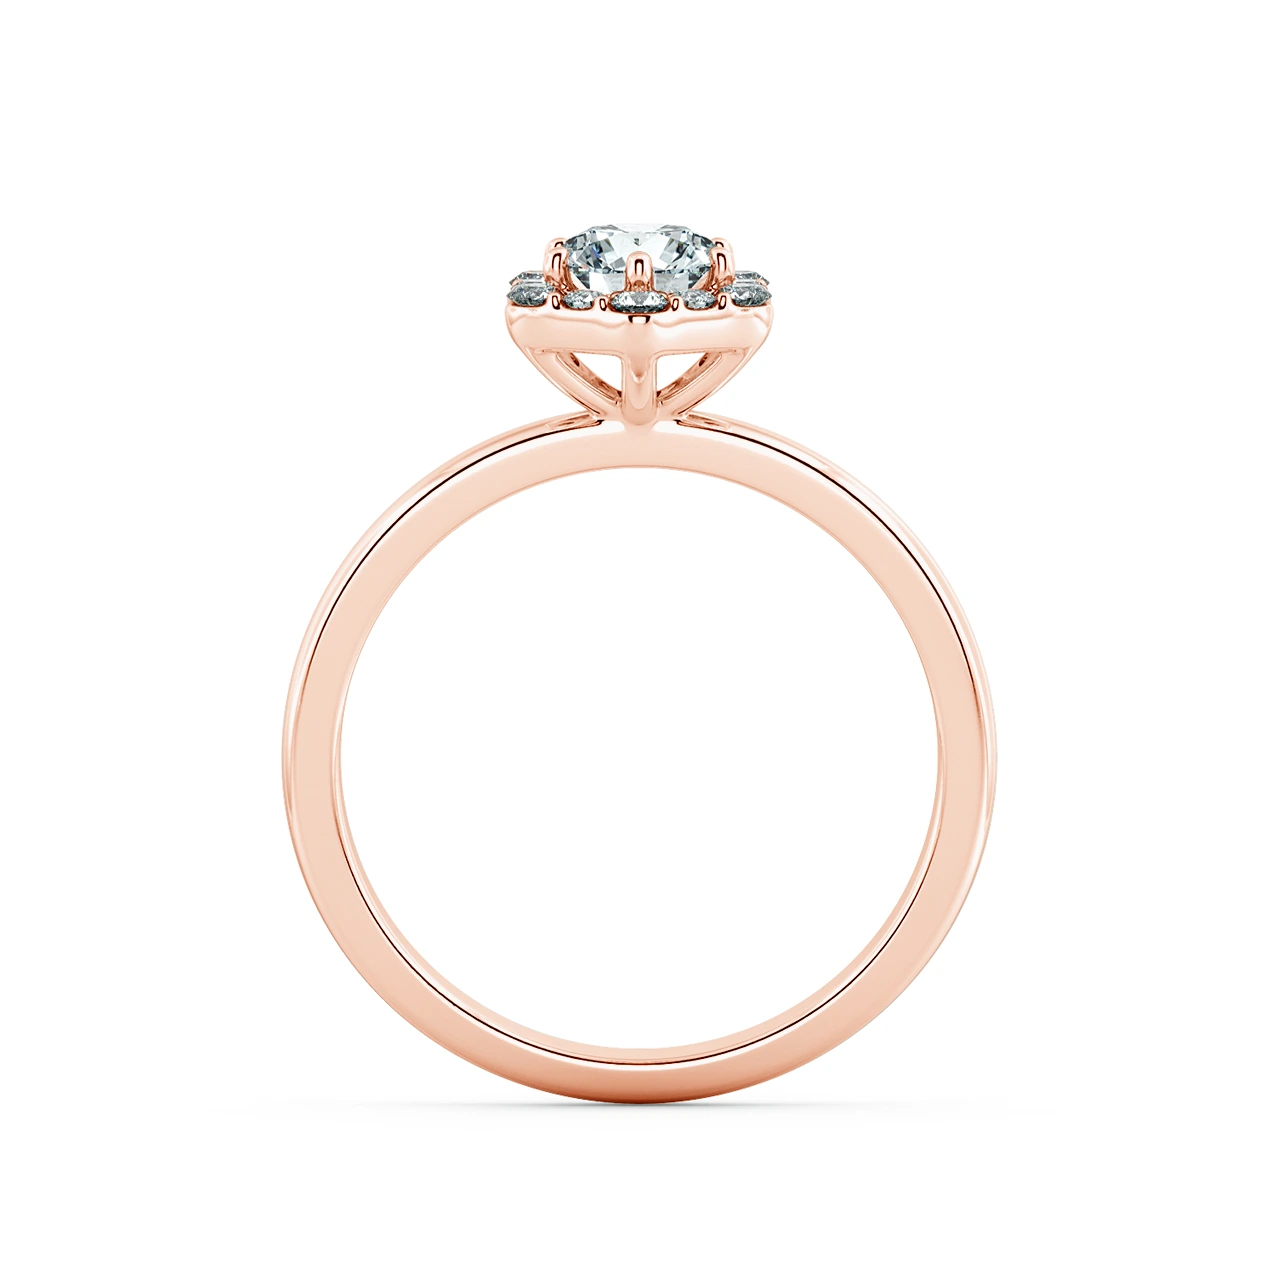 Single Classic Octagonal Halo Engagement Ring NCH2104 5